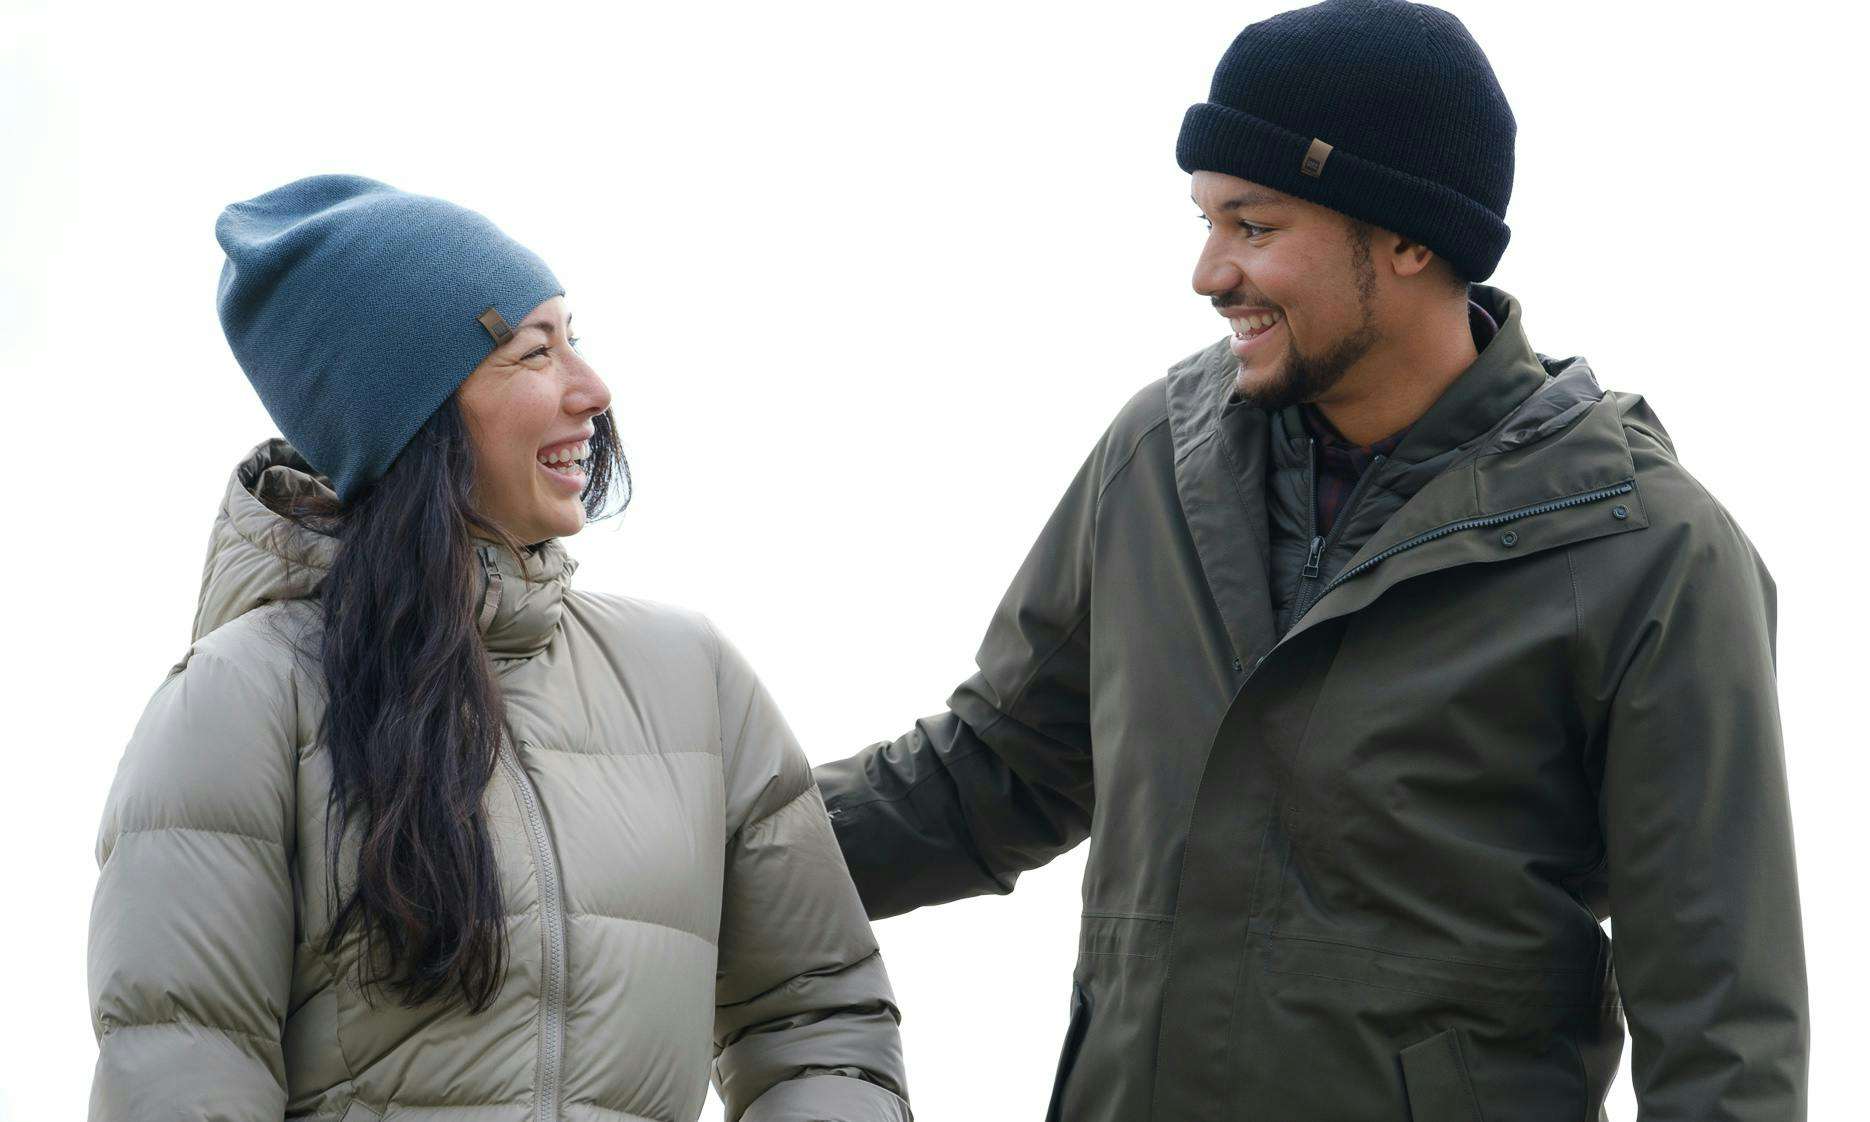 Two people laughing in toques